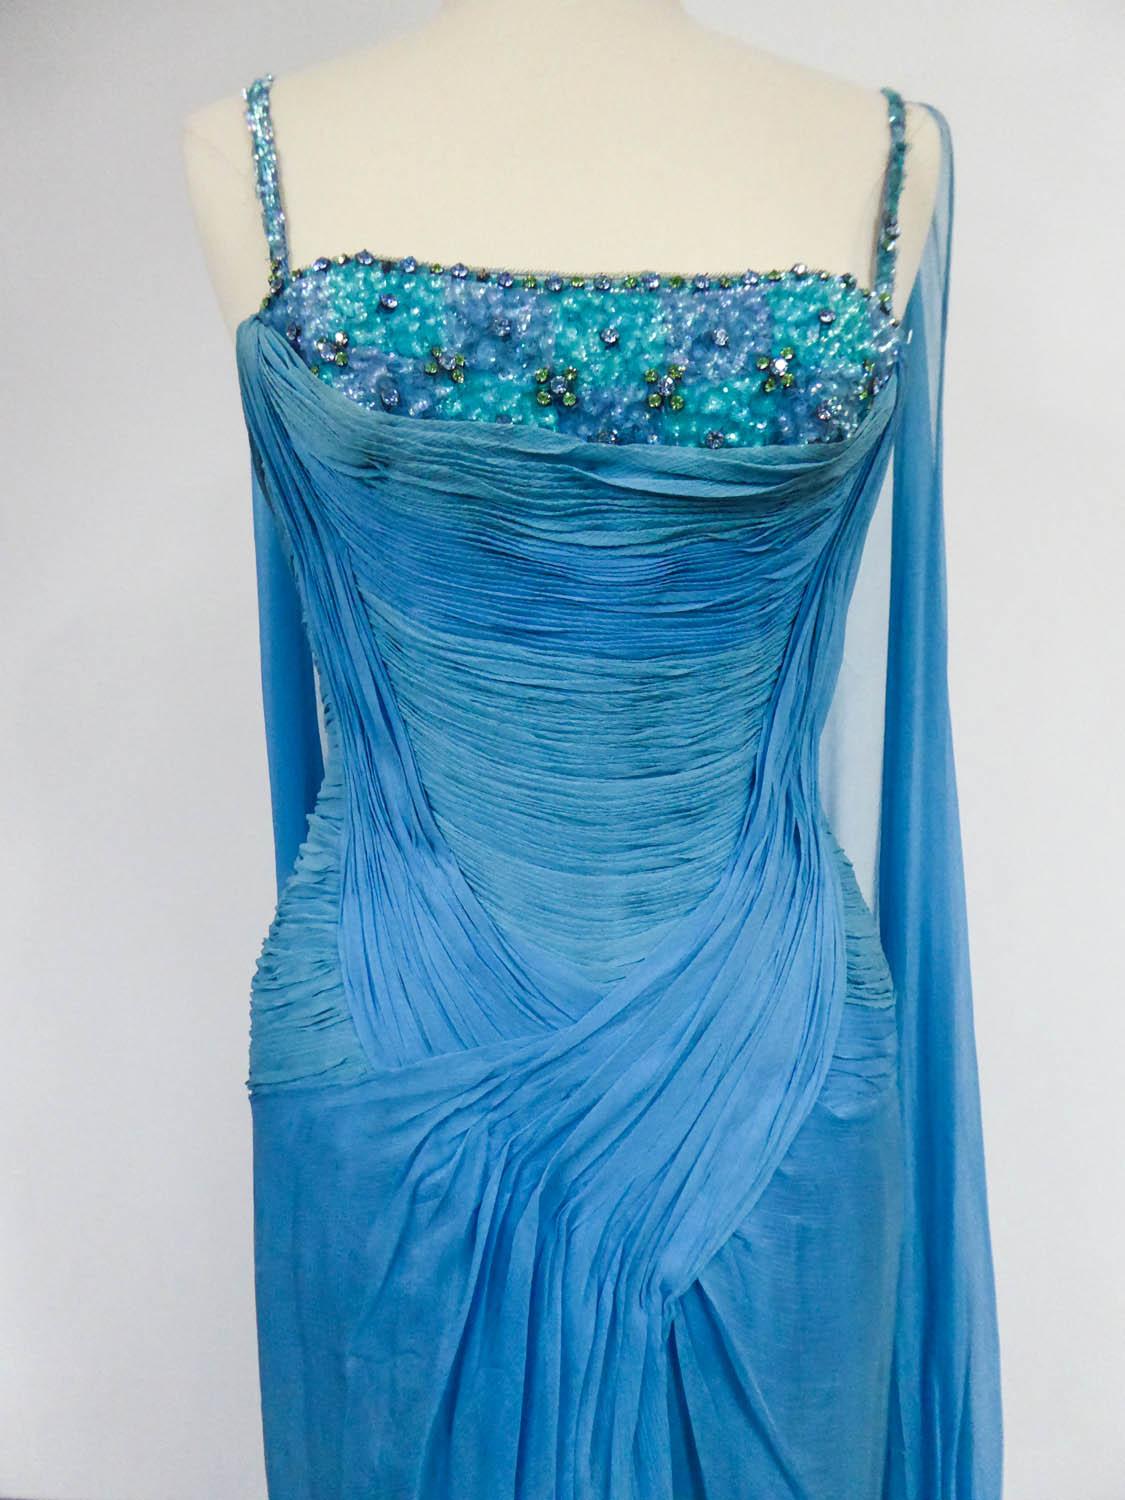 Circa 1960/1970
France

Haute Couture evening dress from Carven House Designer in blue silk muslin from the 60s/70s. Bustier with thin straps and large low-cut neckline embroidered with blue and green sequins in roses and cabochons set with glass